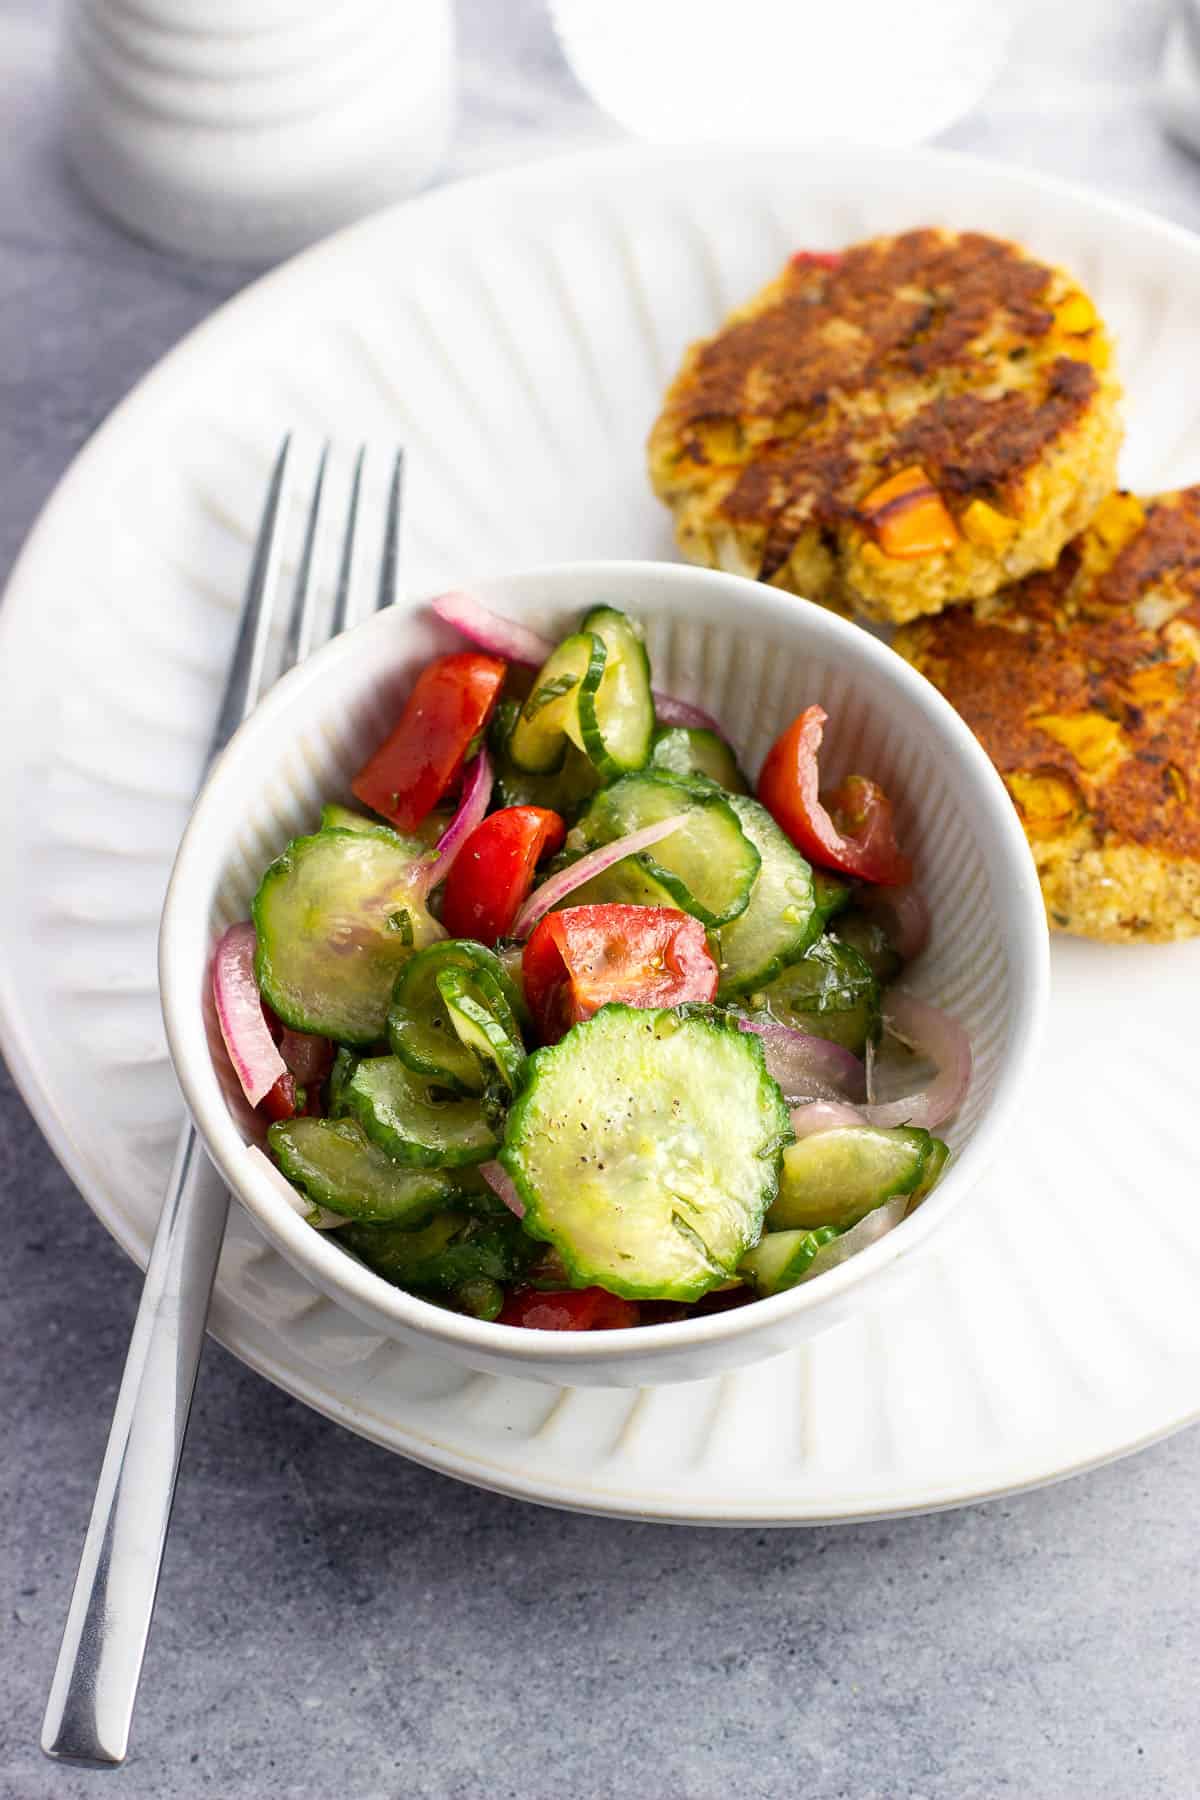 A small side-dish bowl of marinated cucumber salad on a plate next to salmon patties.